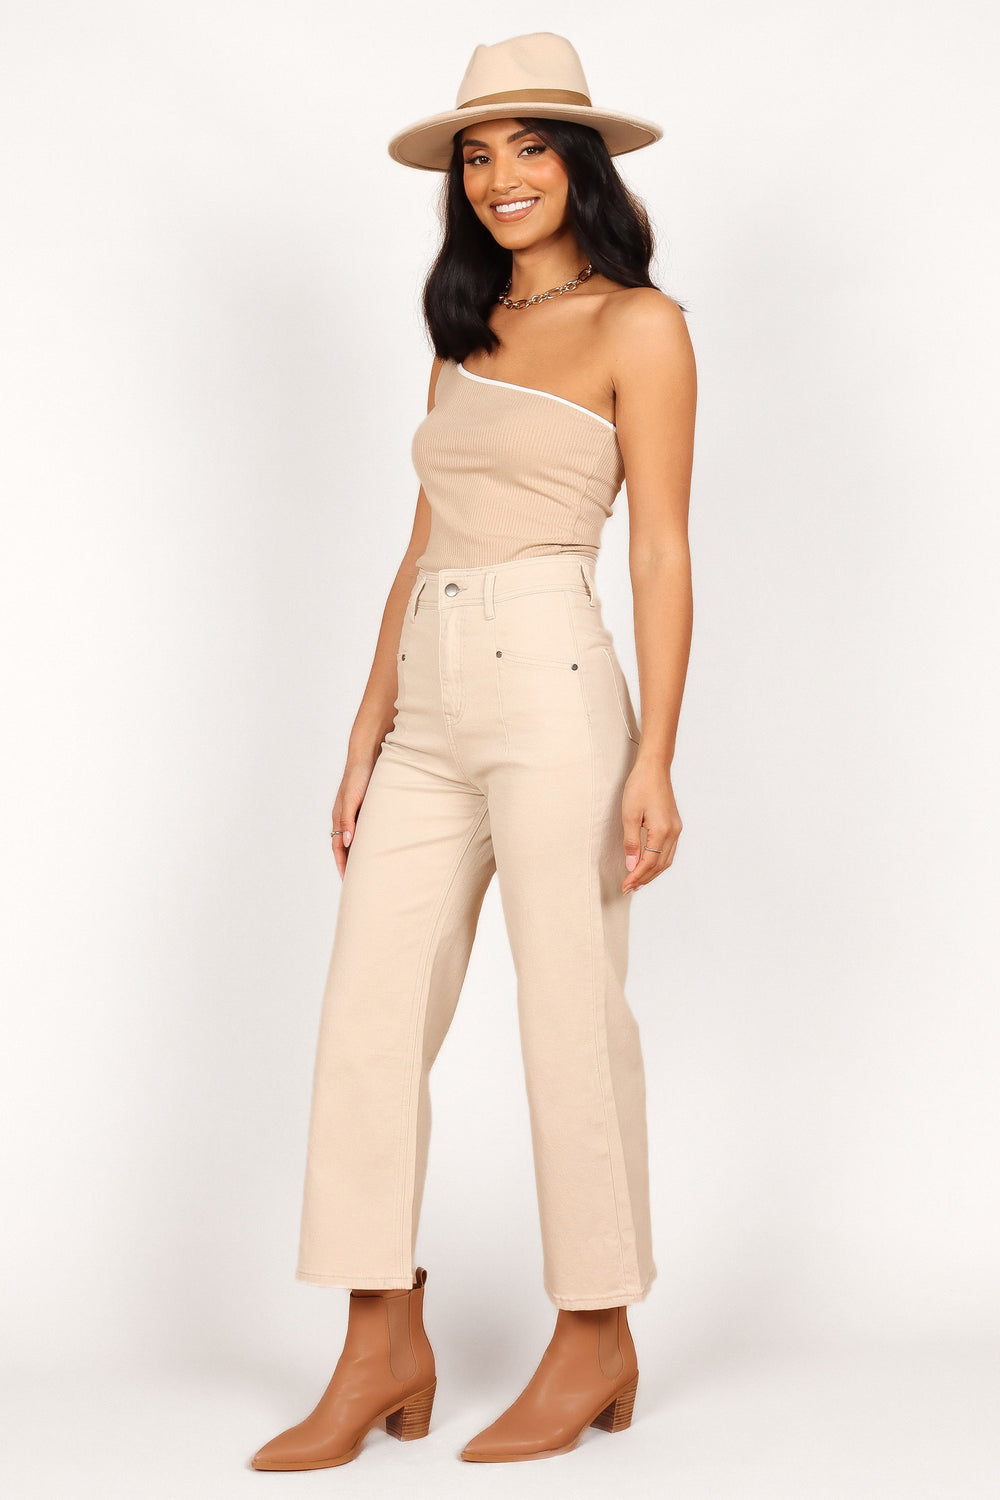 Need Formal high waisted beige/brown (or in middle of both colors) pants  under 1100. I've searched myntra, Ajio, Amazon, Urbanic. Can't find  anything under this range. : r/IndianFashionAddicts